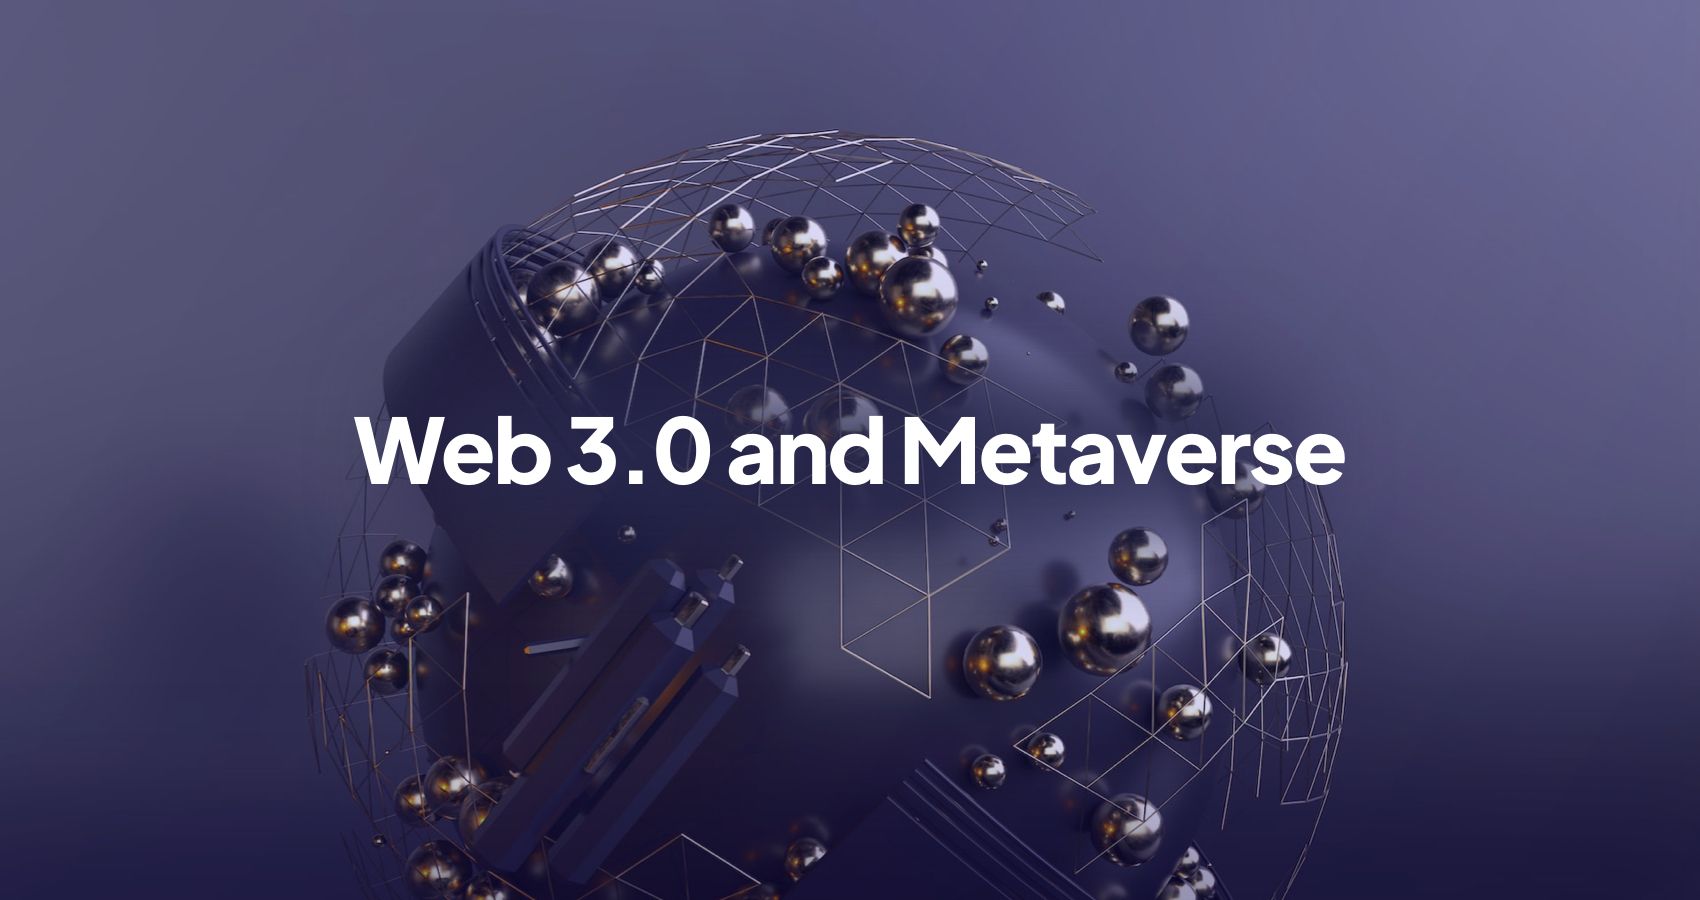 Getting To Know The Internet Computer Metaverse Ecosystem